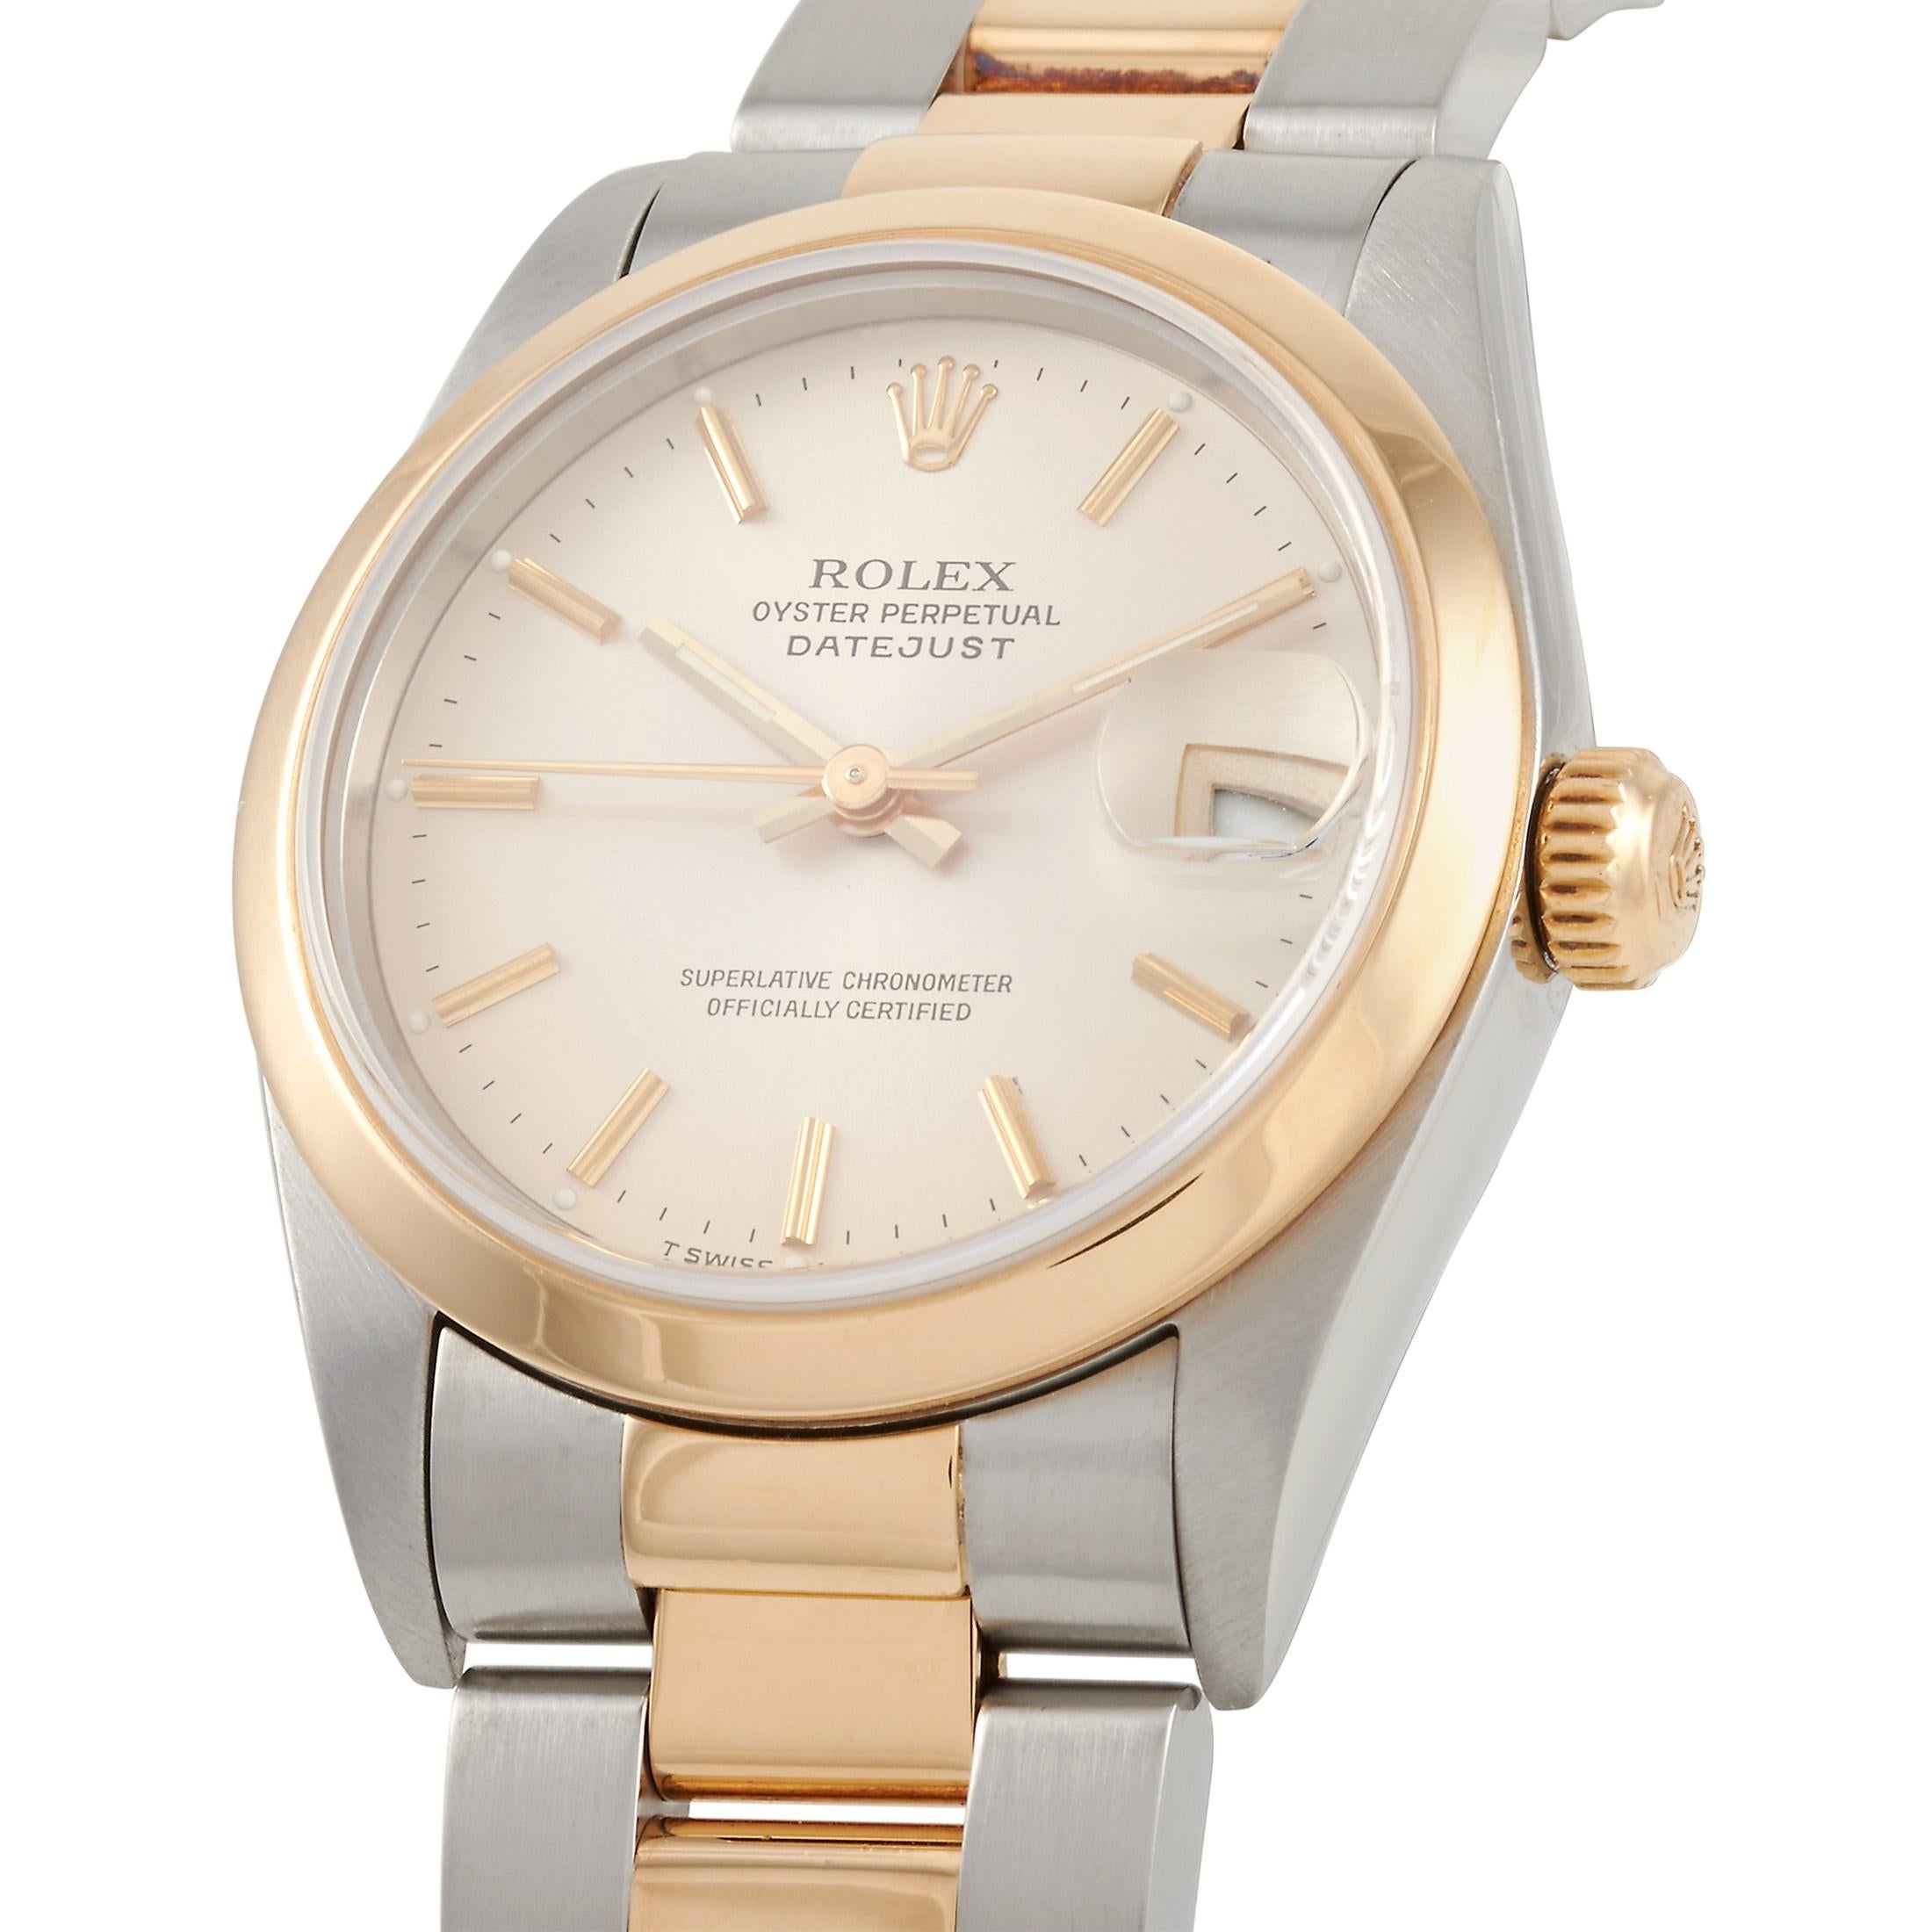 This Rolex Datejust Two-Tone 31mm Watch, reference number 68243, features a stainless steel and yellow gold case measuring 31 mm in diameter with a yellow gold bezel. It is presented on a matching stainless steel and yellow gold bracelet with